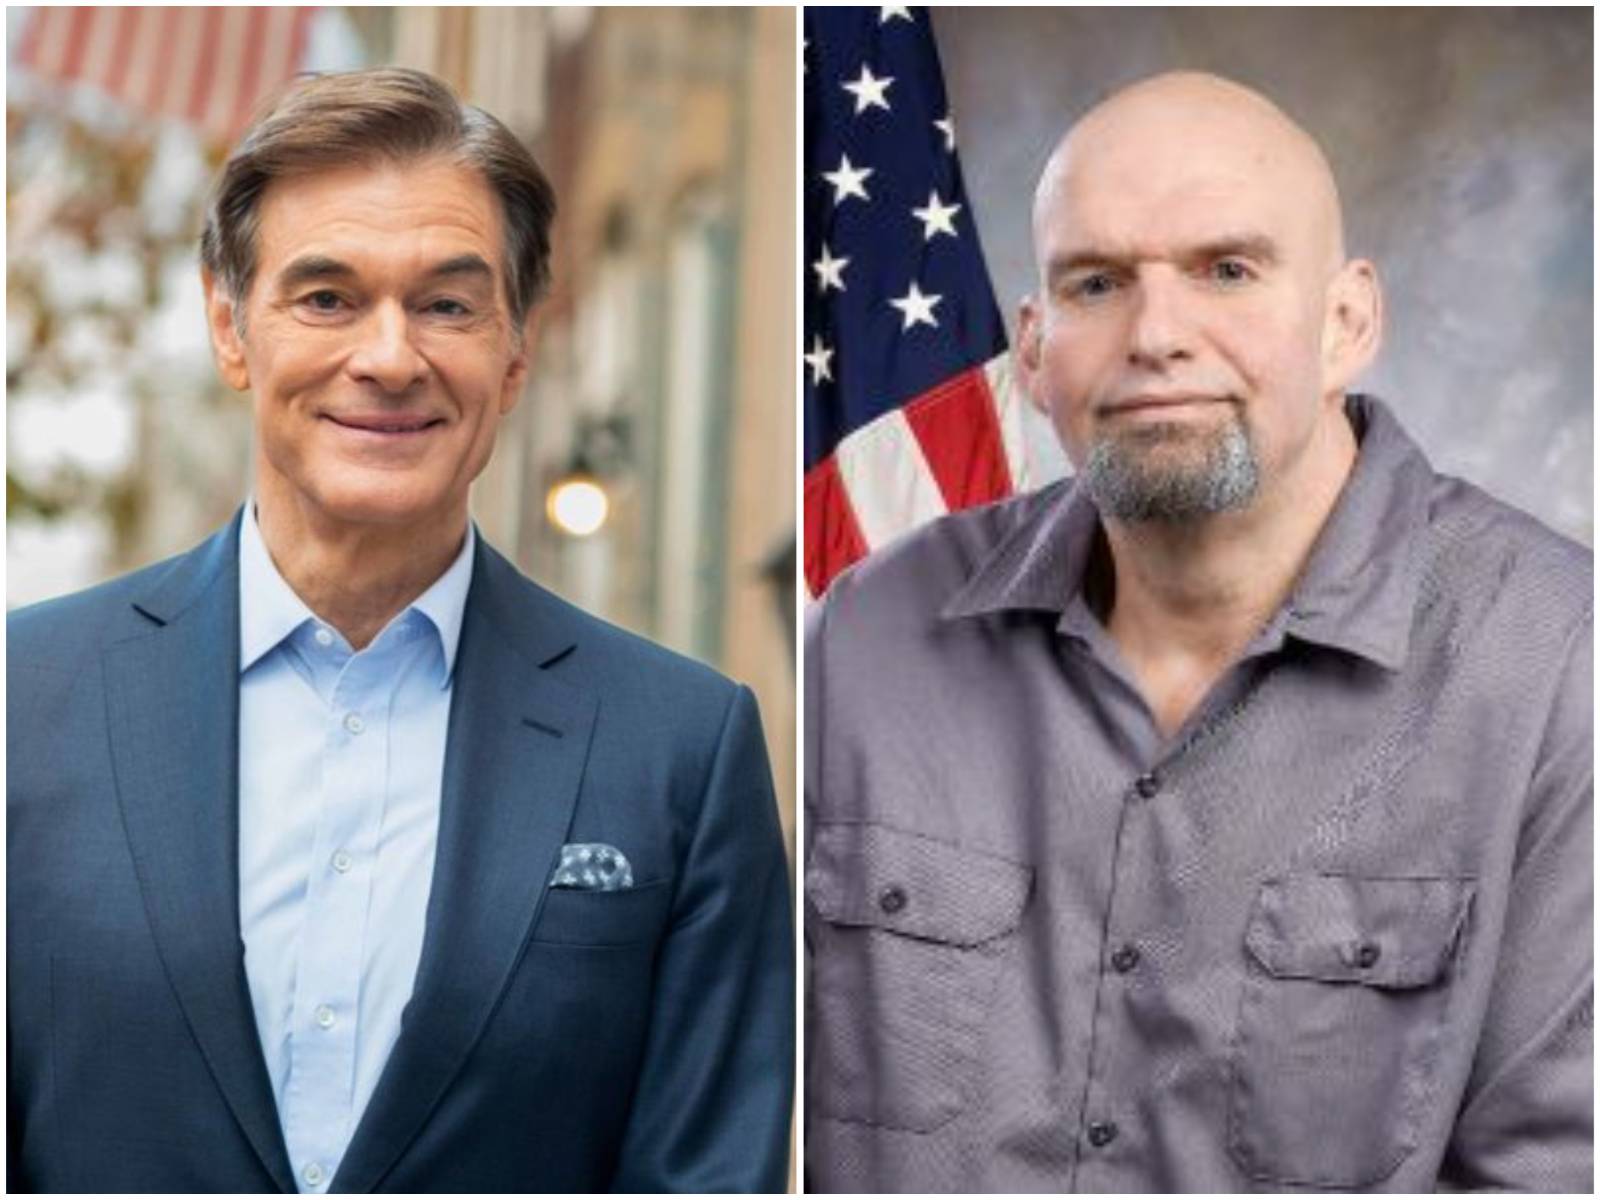 Mehmet Oz, left, and John Fetterman, are vying for a U.S. Senate seat in Pennsylvania in one of the country's most highly-watched contests.